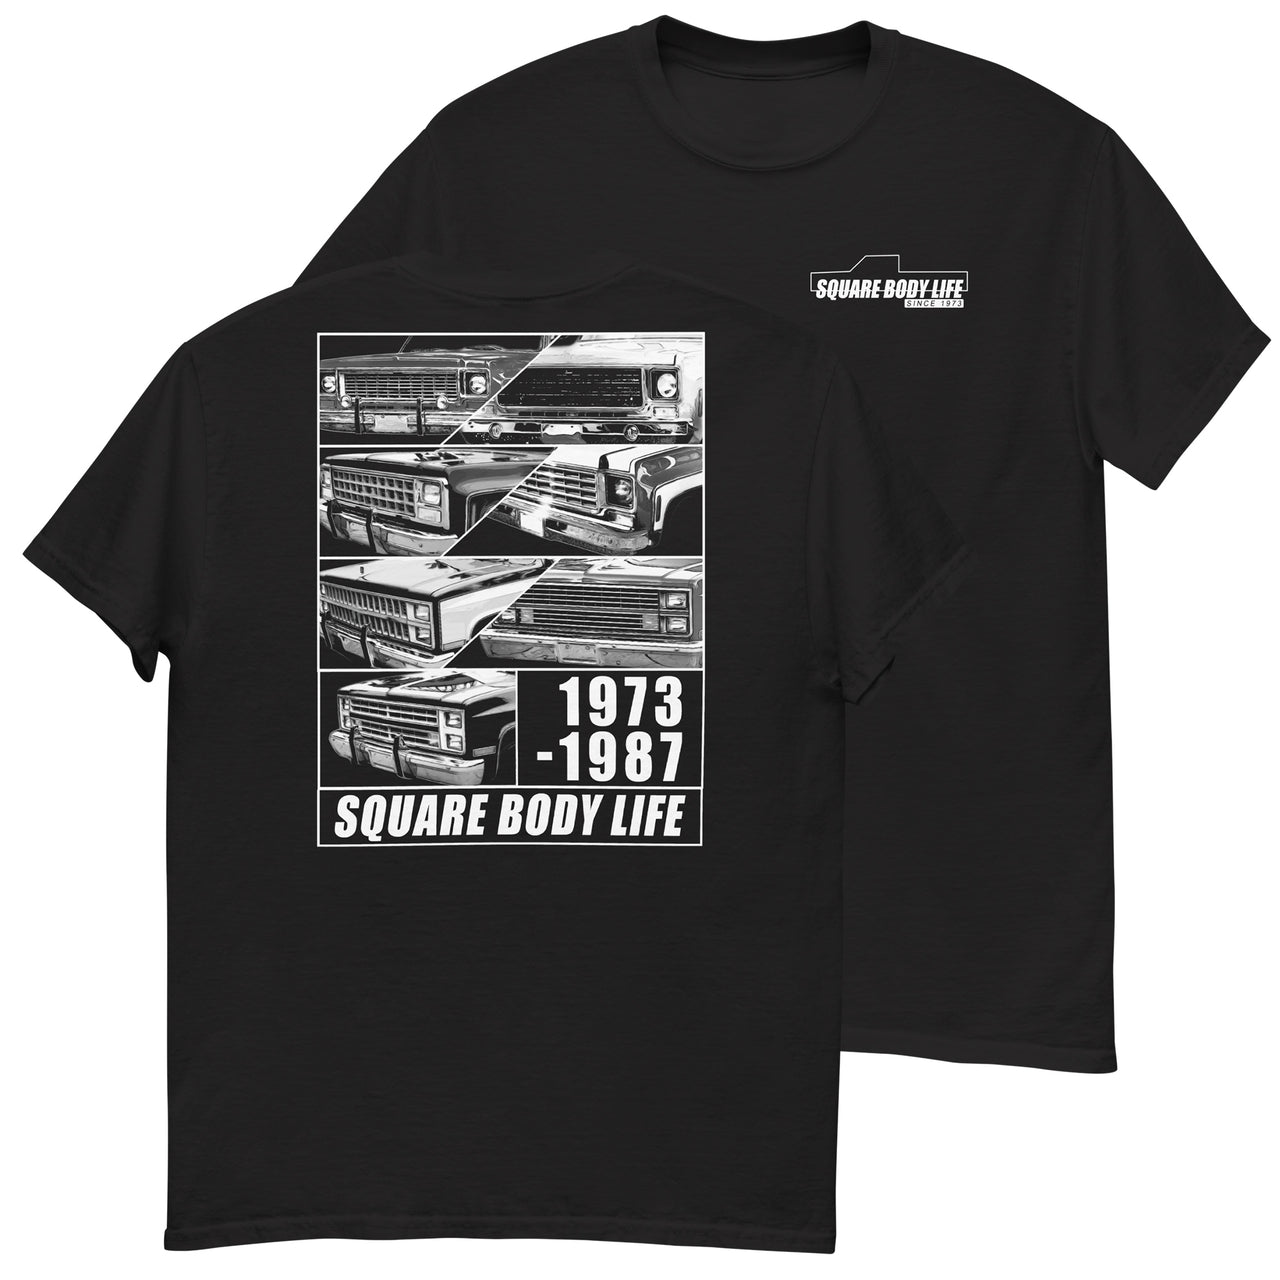 Square Body Life T-Shirt in black